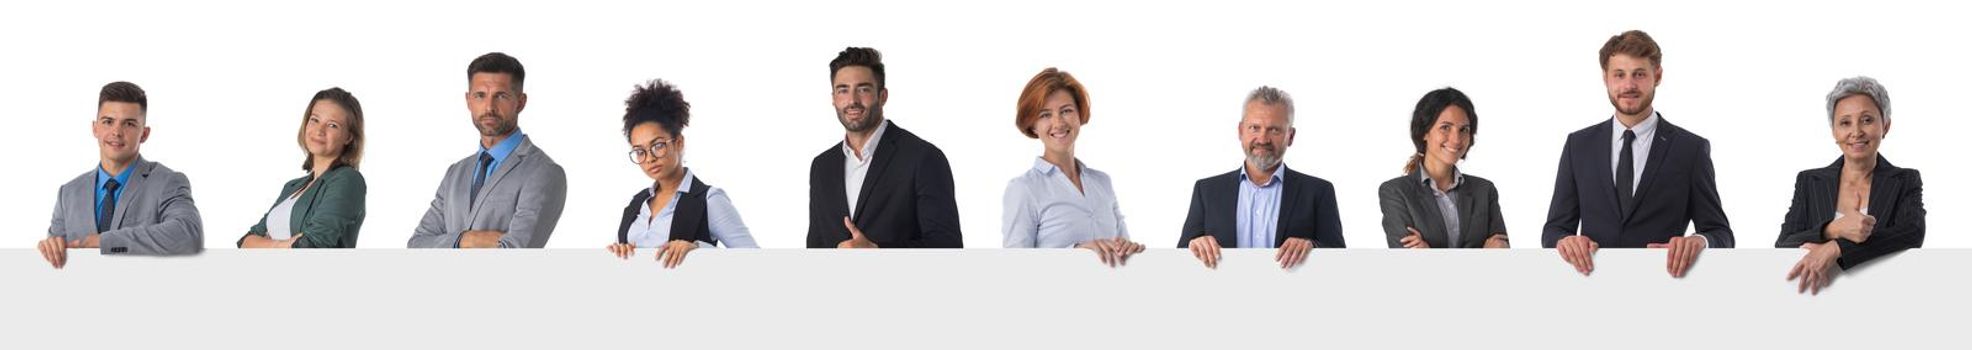 Group of business people holding blank banner ad isolated on white background